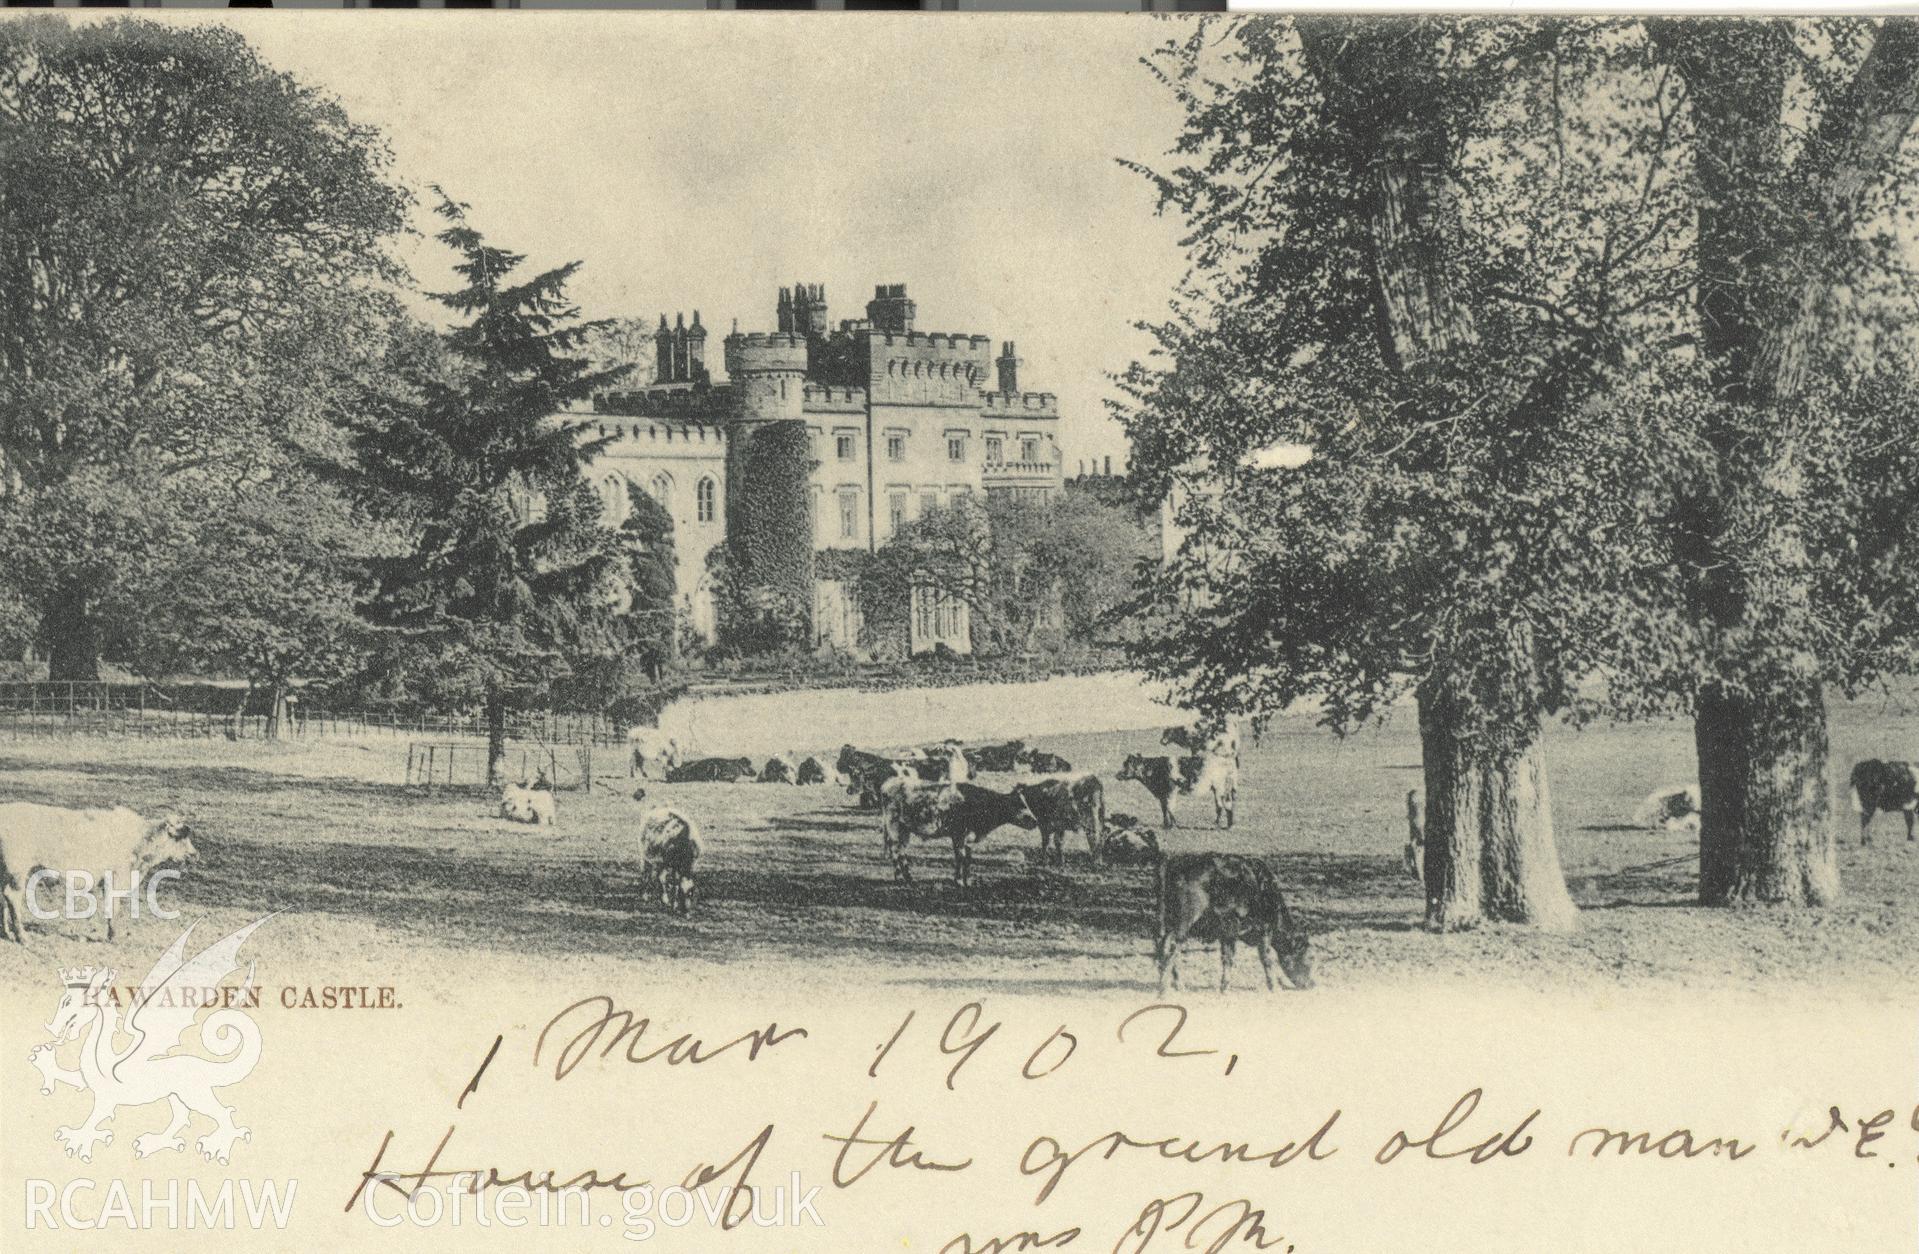 Digitised postcard image of Hawarden Castle, Raphael Tuck and Sons Ltd. Produced by Parks and Gardens Data Services, from an original item in the Peter Davis Collection at Parks and Gardens UK. We hold only web-resolution images of this collection, suitable for viewing on screen and for research purposes only. We do not hold the original images, or publication quality scans.